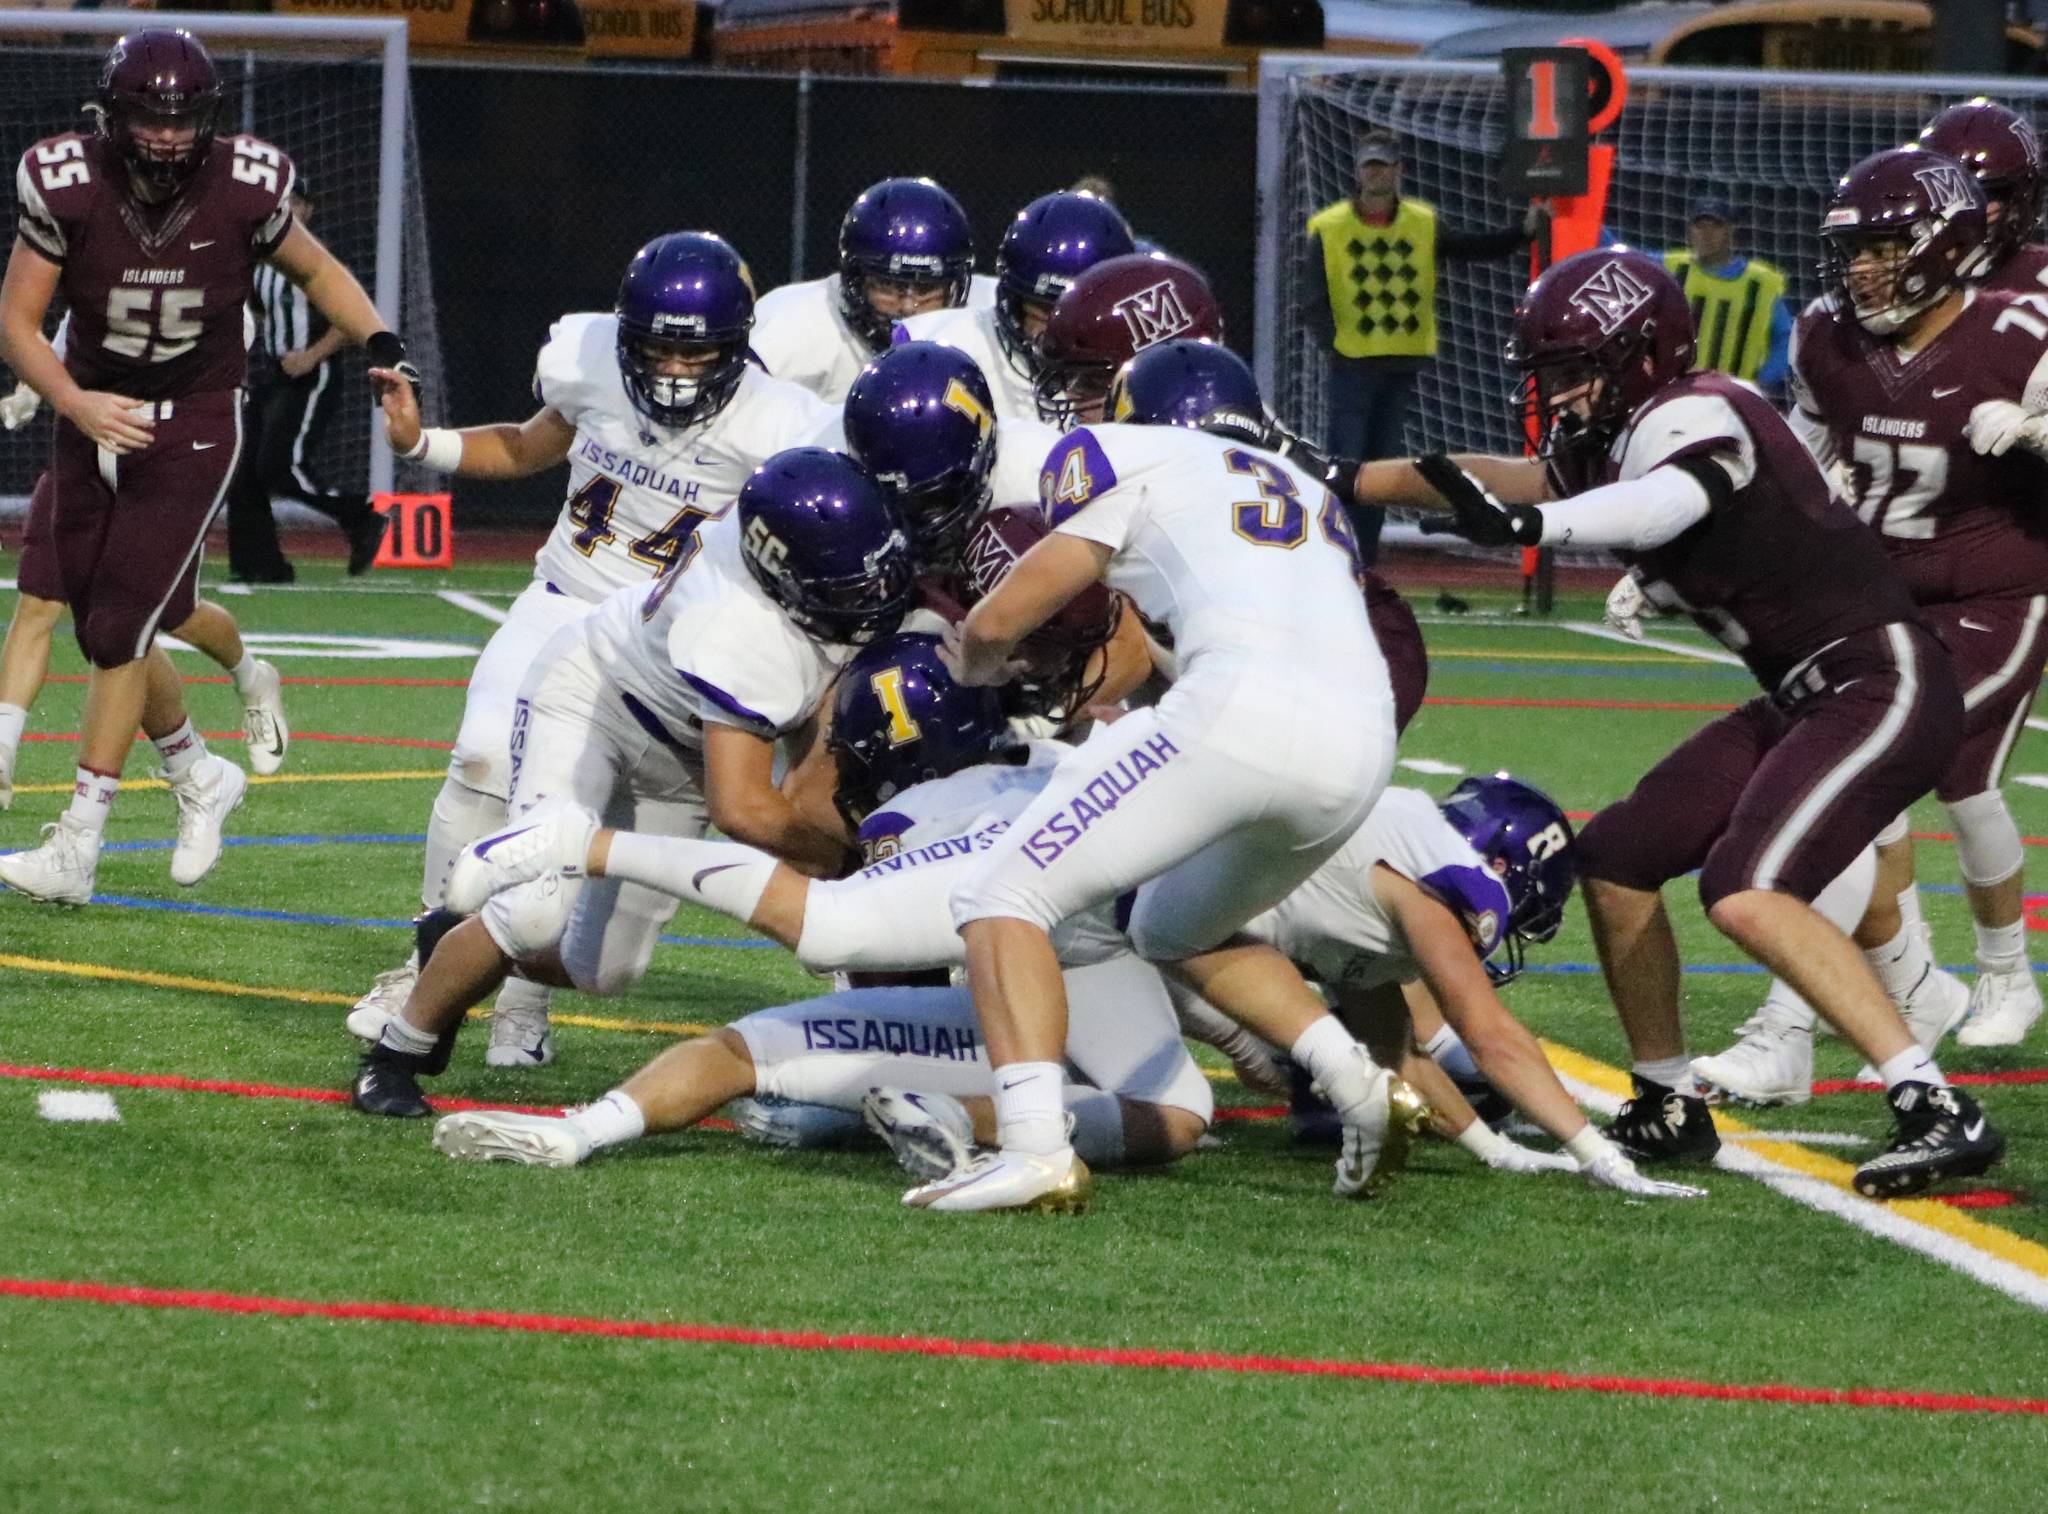 The Eagles defense swarming to the ball during the first quarter of their 12-3 victory over Mercer Island on Sept. 13. Benjamin Olson/ staff photo